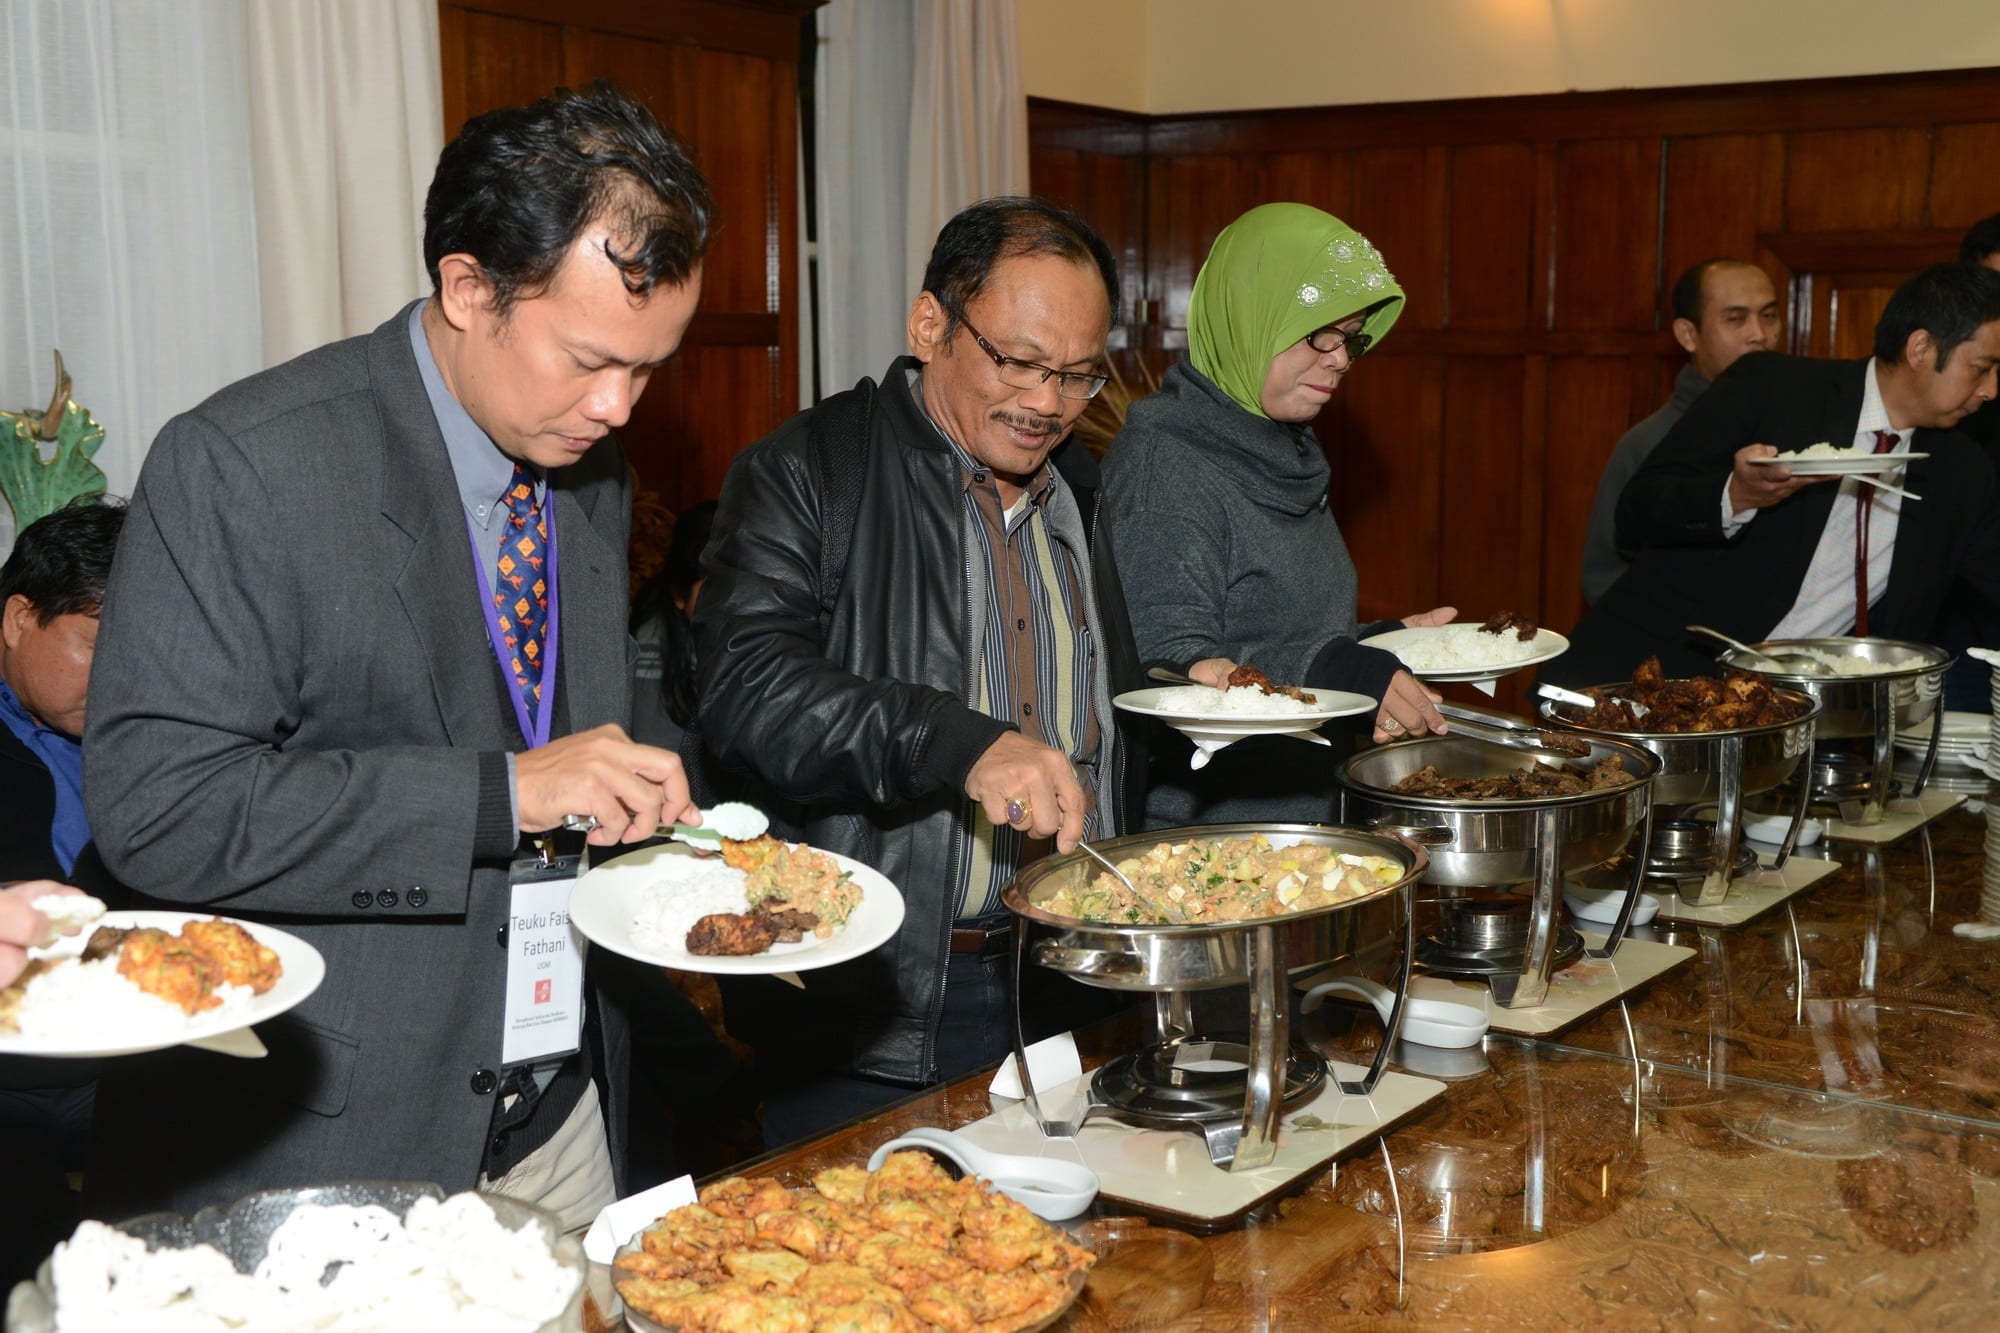 Dinner at function at Indonesian Embassy as part of the StIRRRD Comparative Study Tour